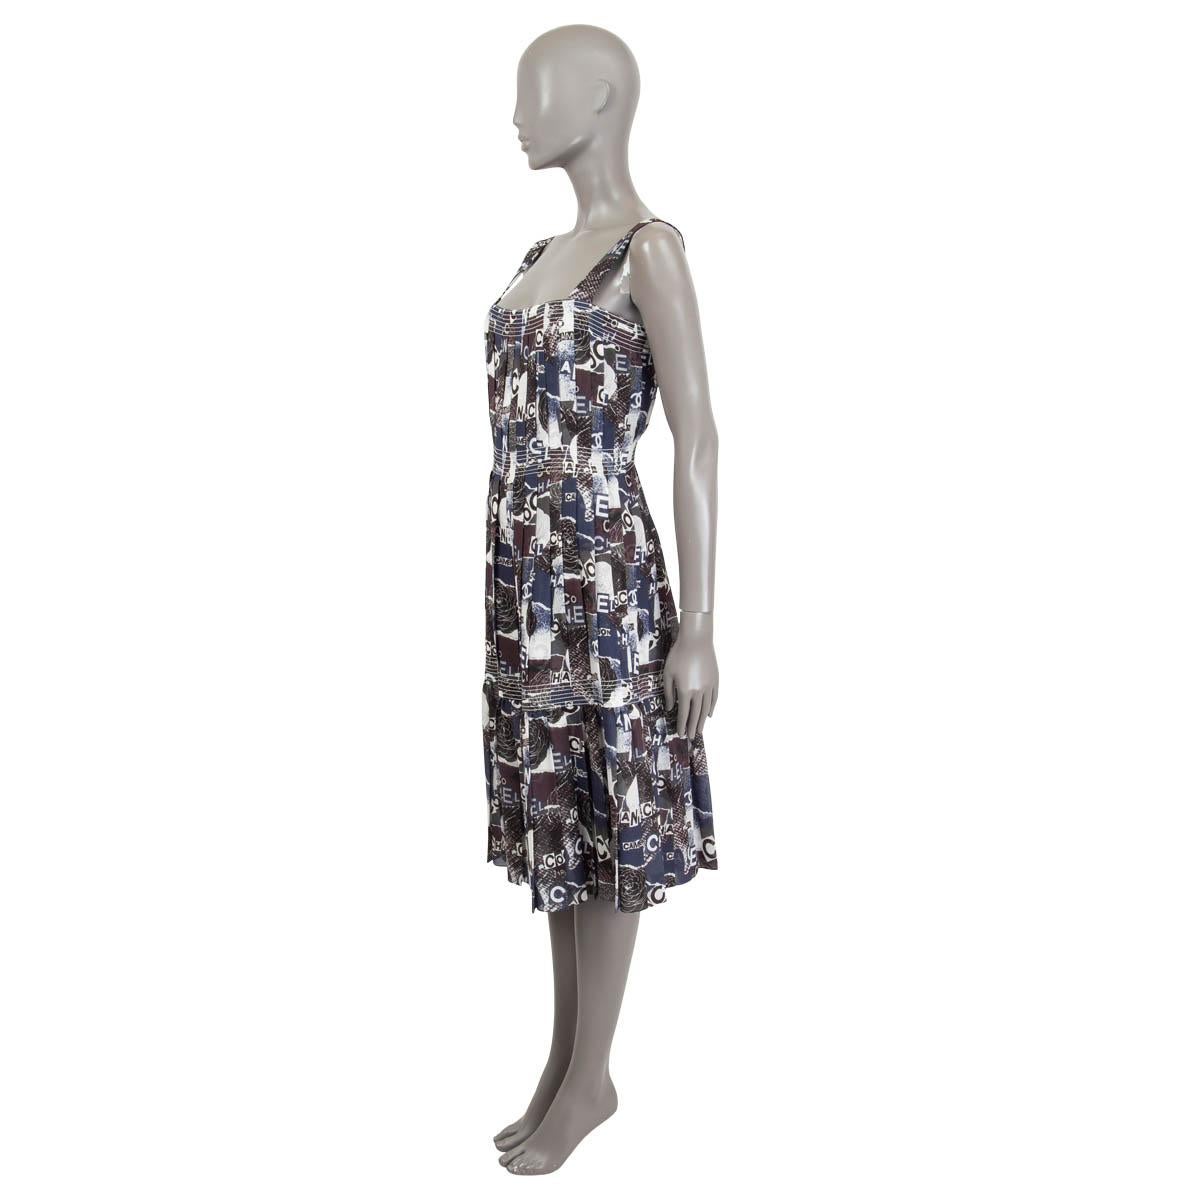 100% authentic Chanel 2020 sleeveless pleated dress in pale navy, pale brown, white, black and pale olive green logo and Camellia printed silk (100%). Opens with 7 hidden buttons on the back. Has been worn once and isn in virtually new condition.